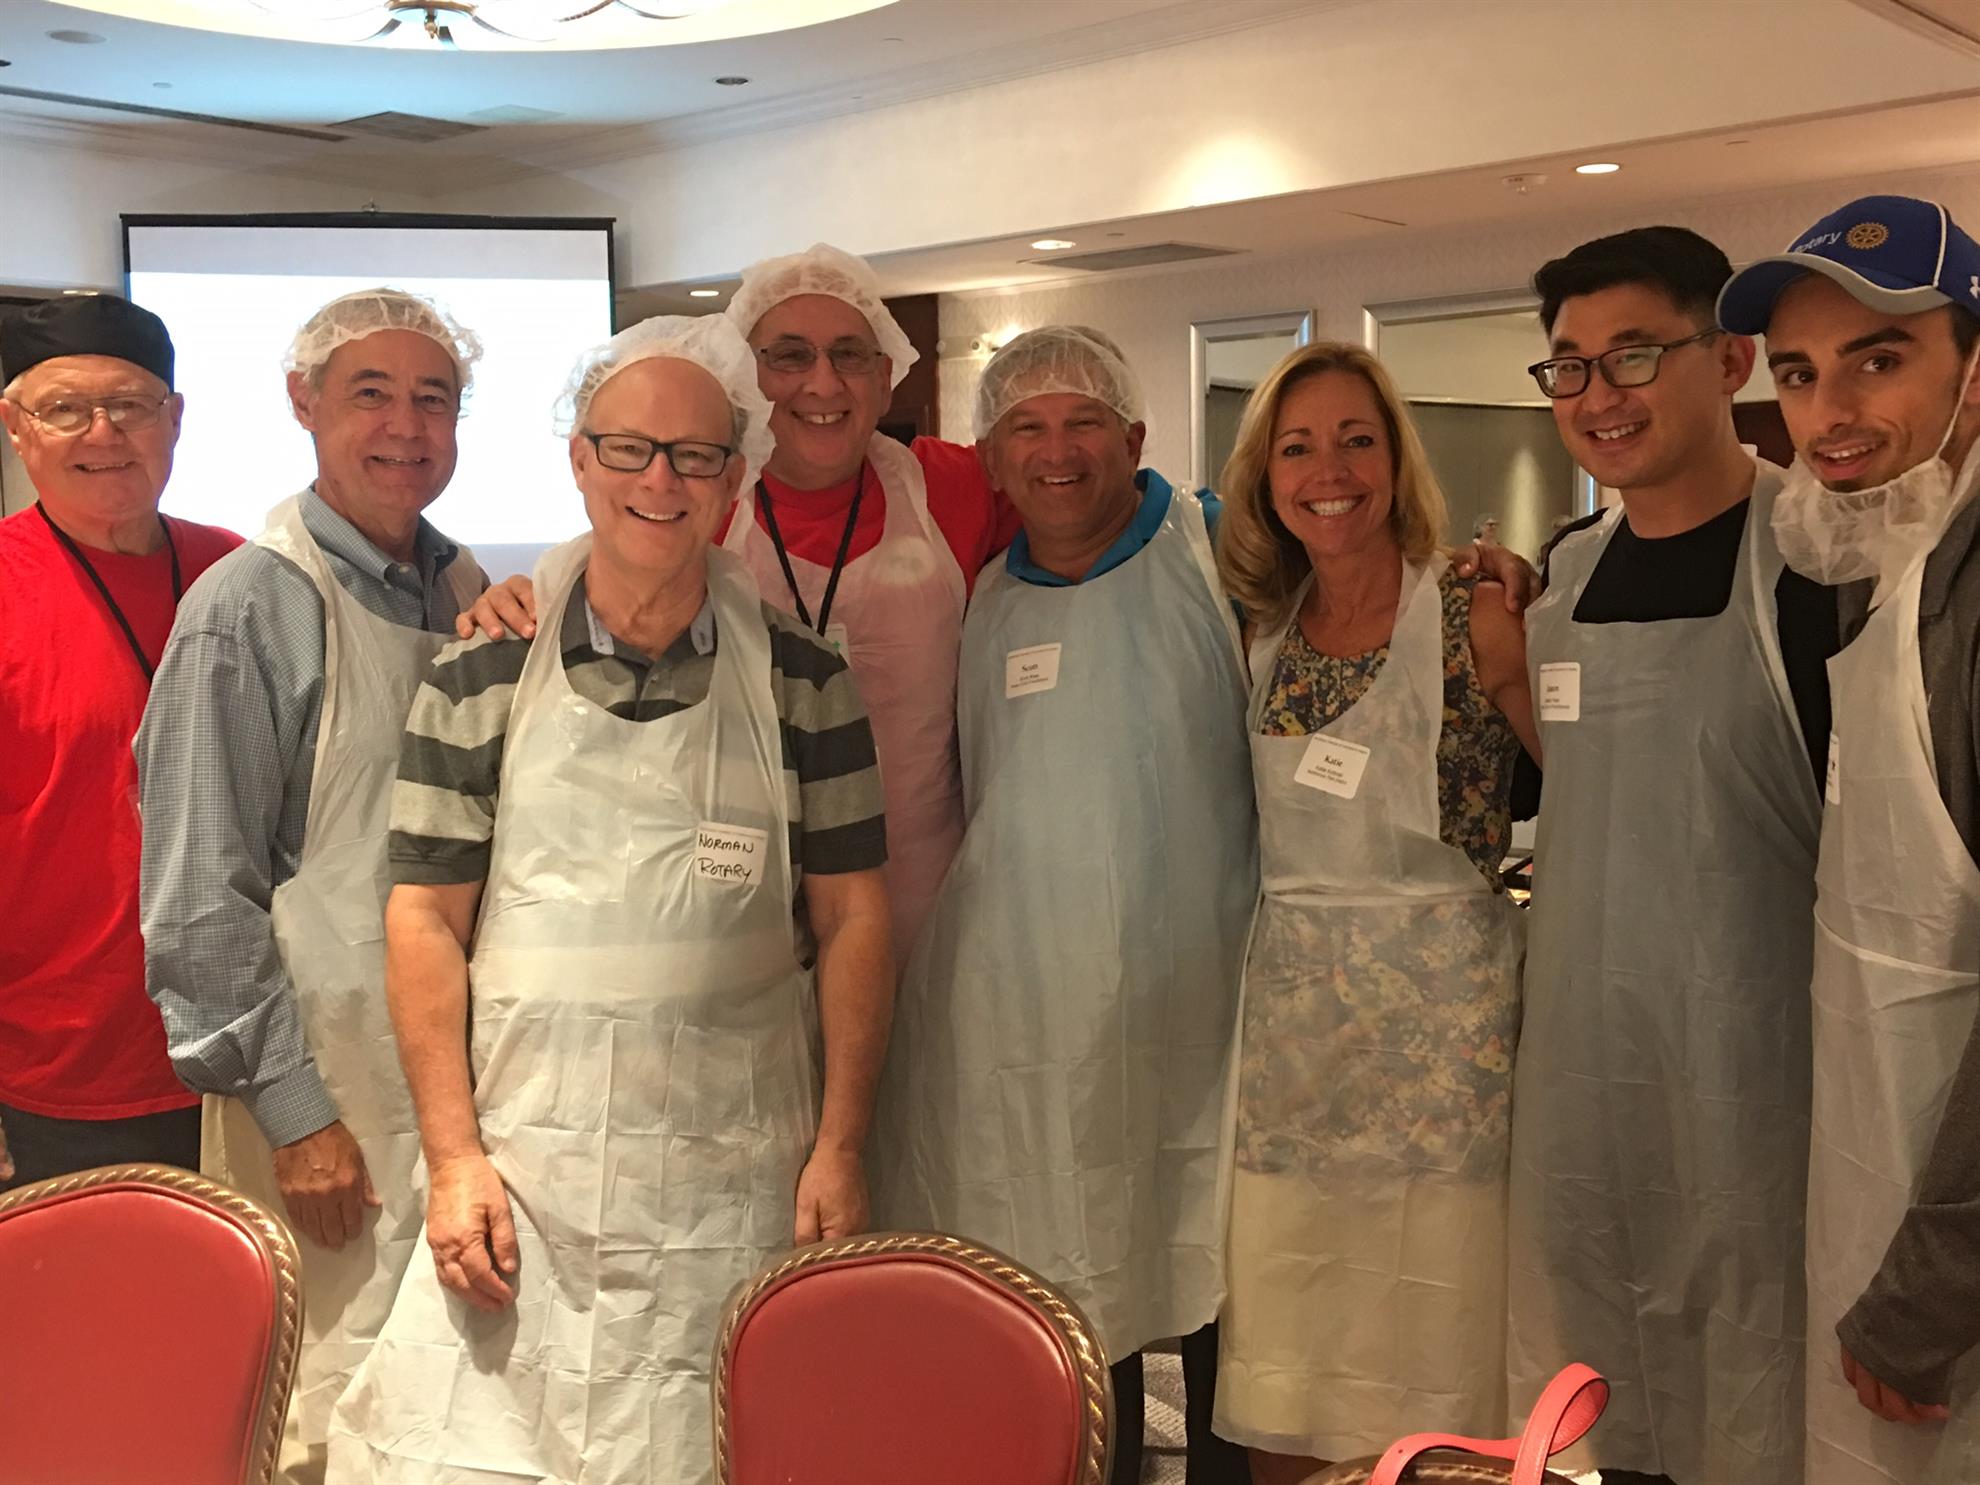 Rotarians volunteering at the Northbrook Chamber of Commerce Meal Packing Event